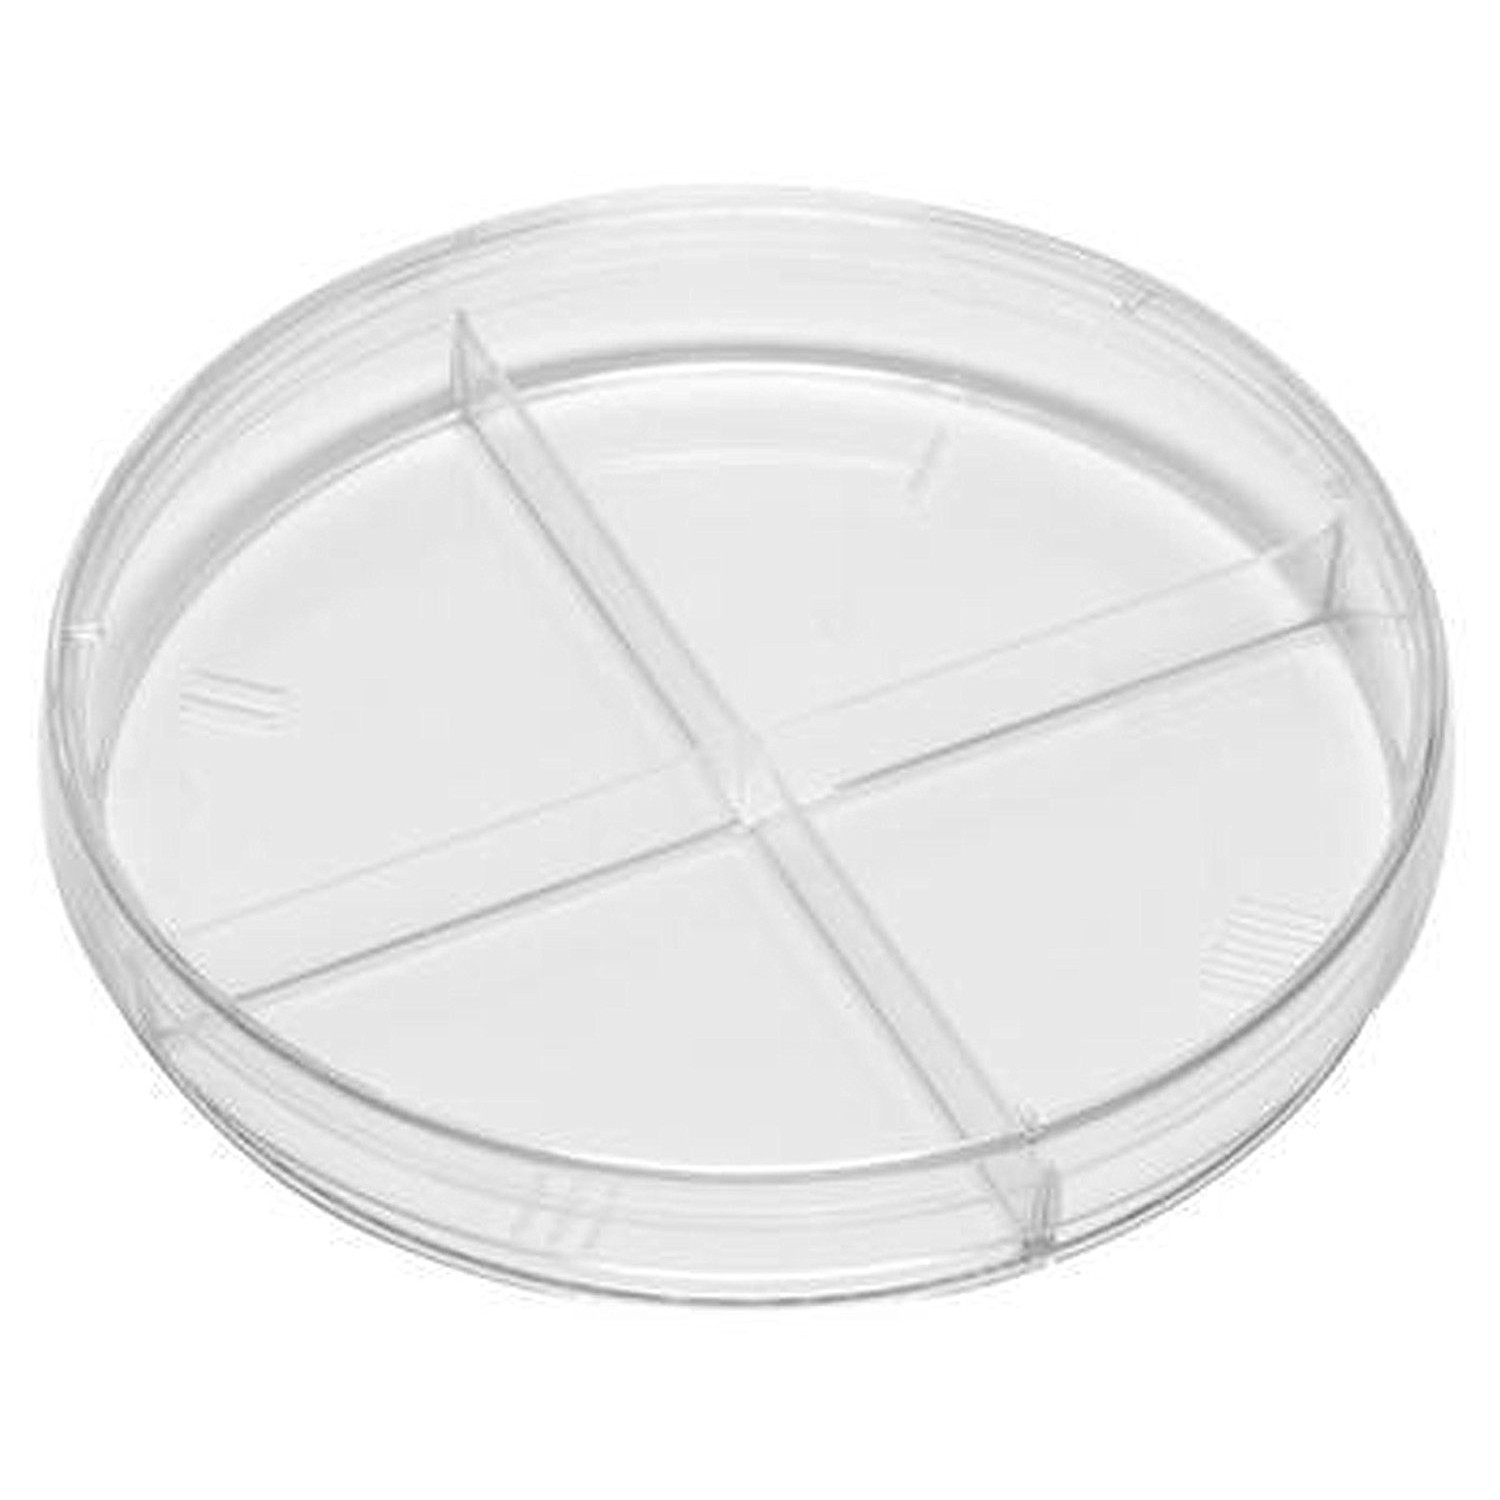 Kord-Valmark 2913 Stackable Petri Dish With Four Compartments ...